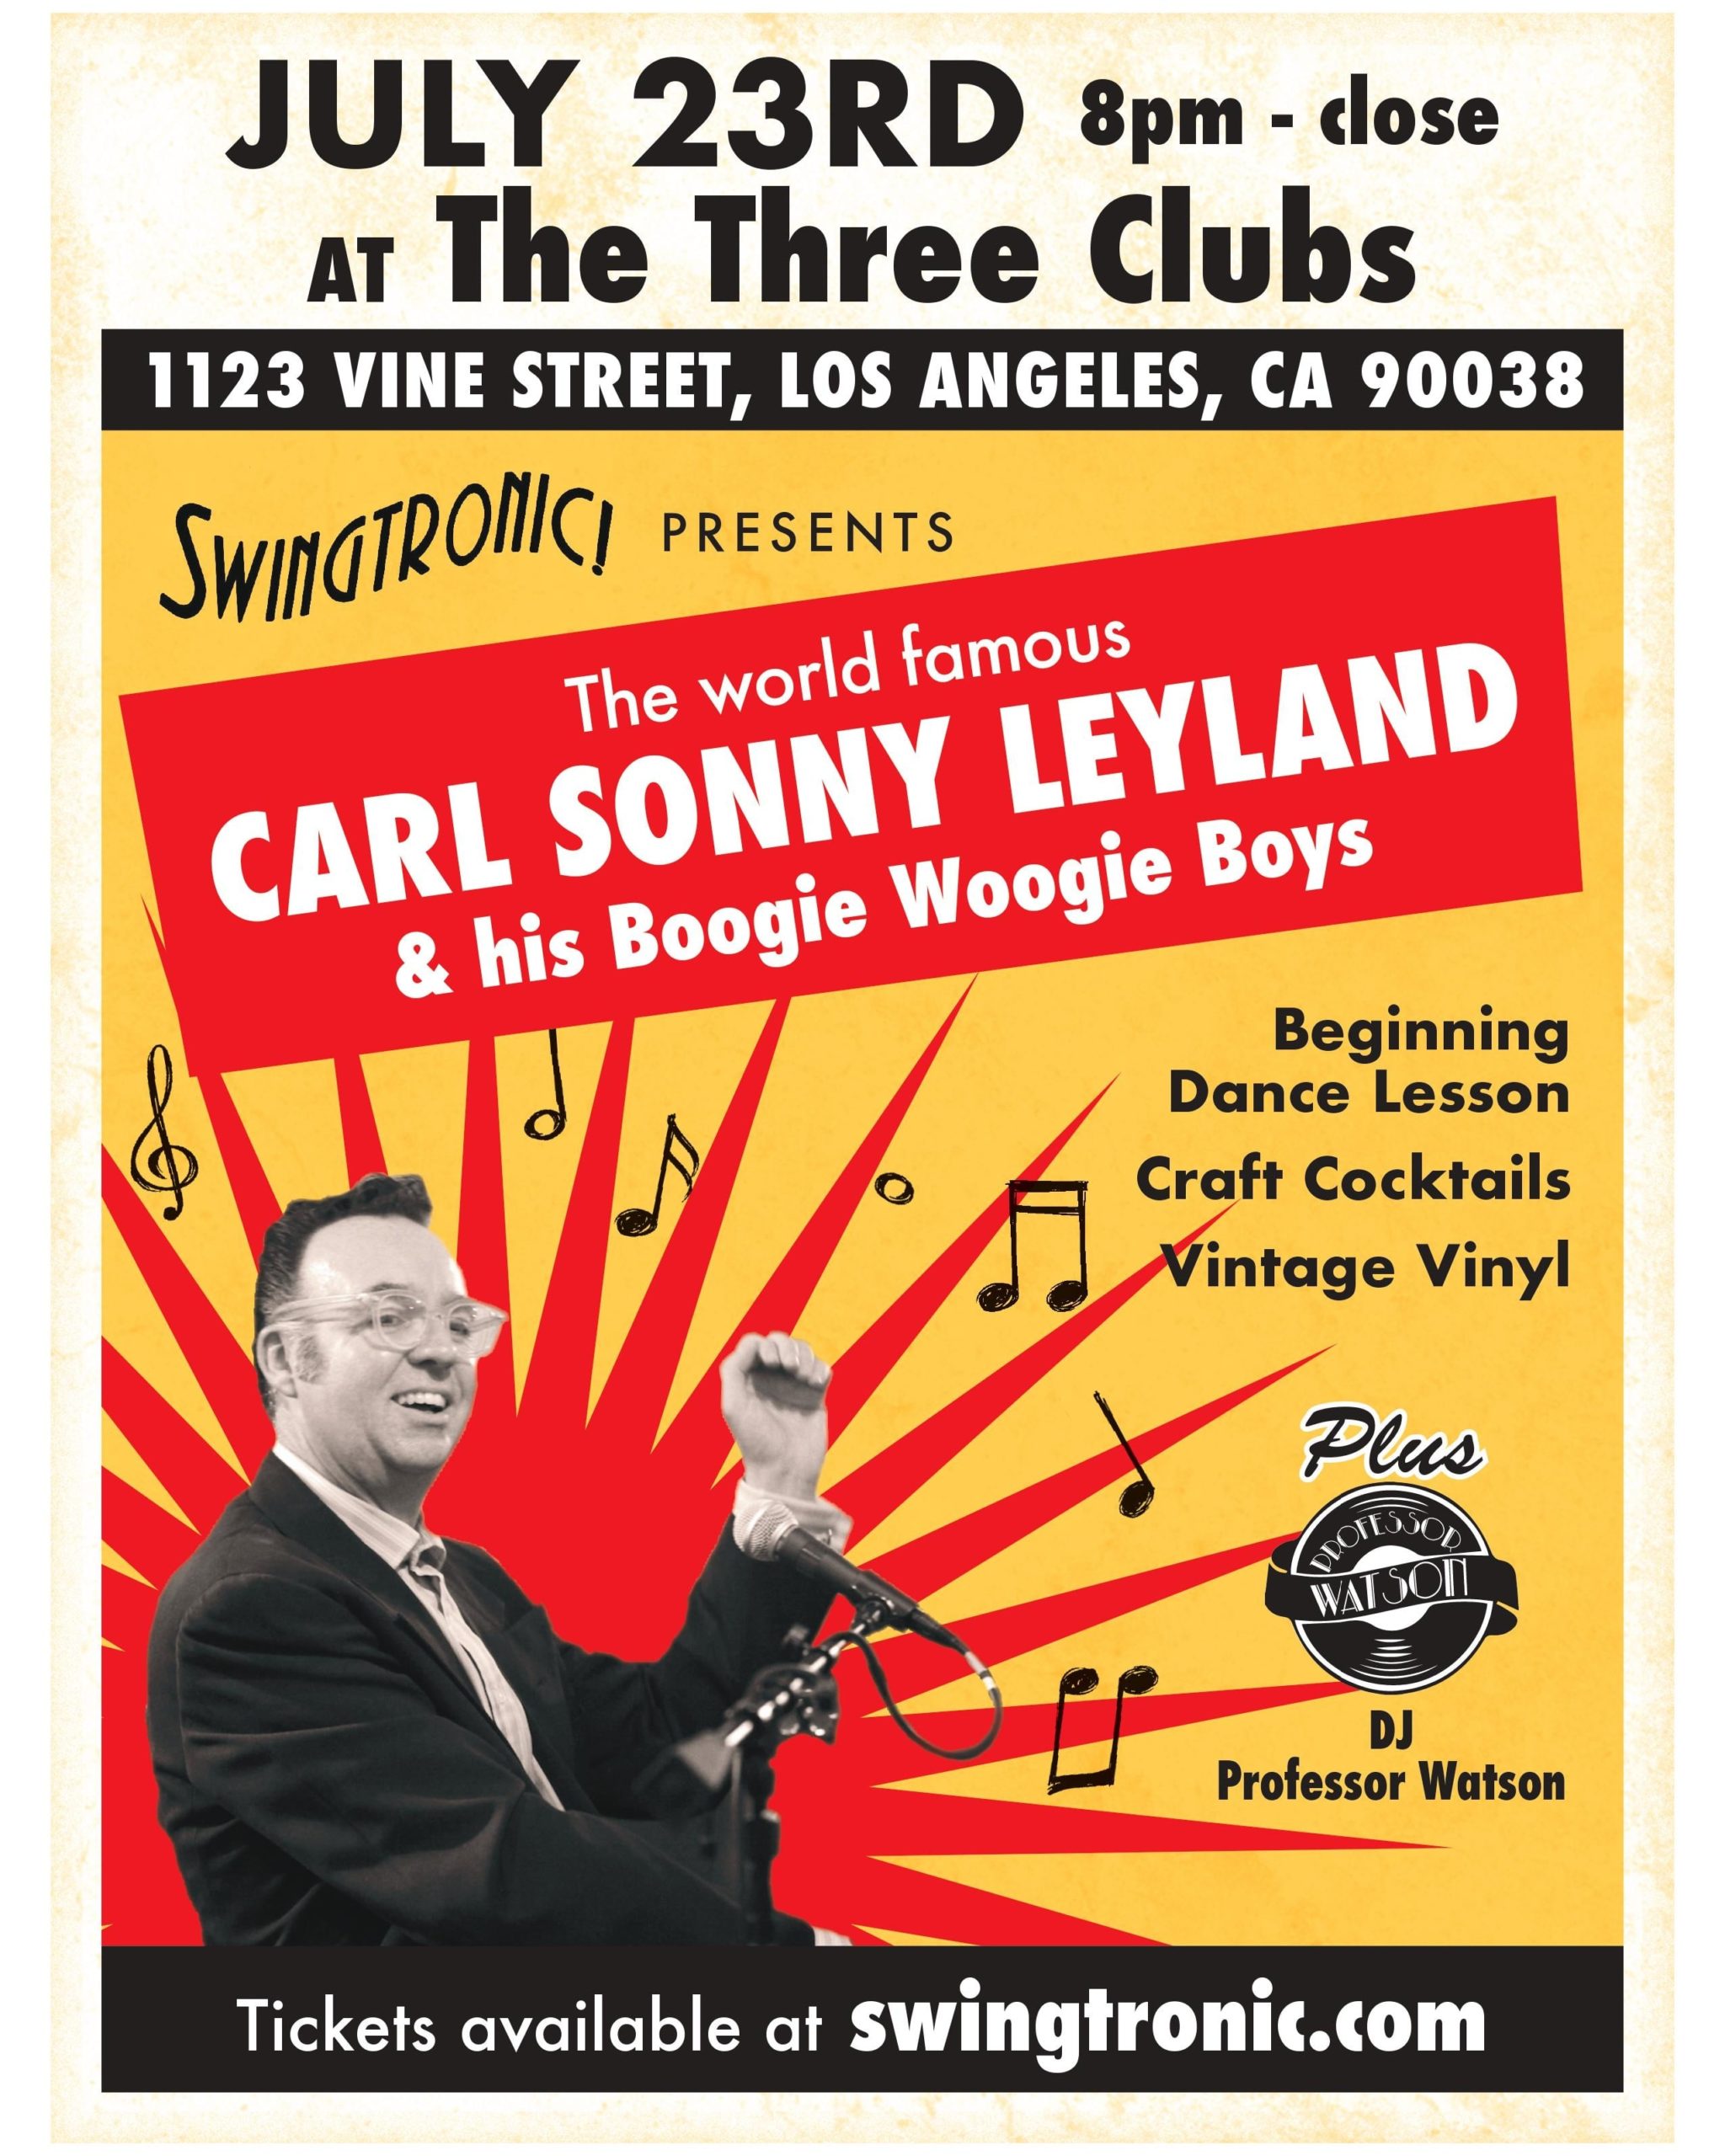 Swingtronic presents Carl Sonny Leyland and his Boogie Woogie Boys